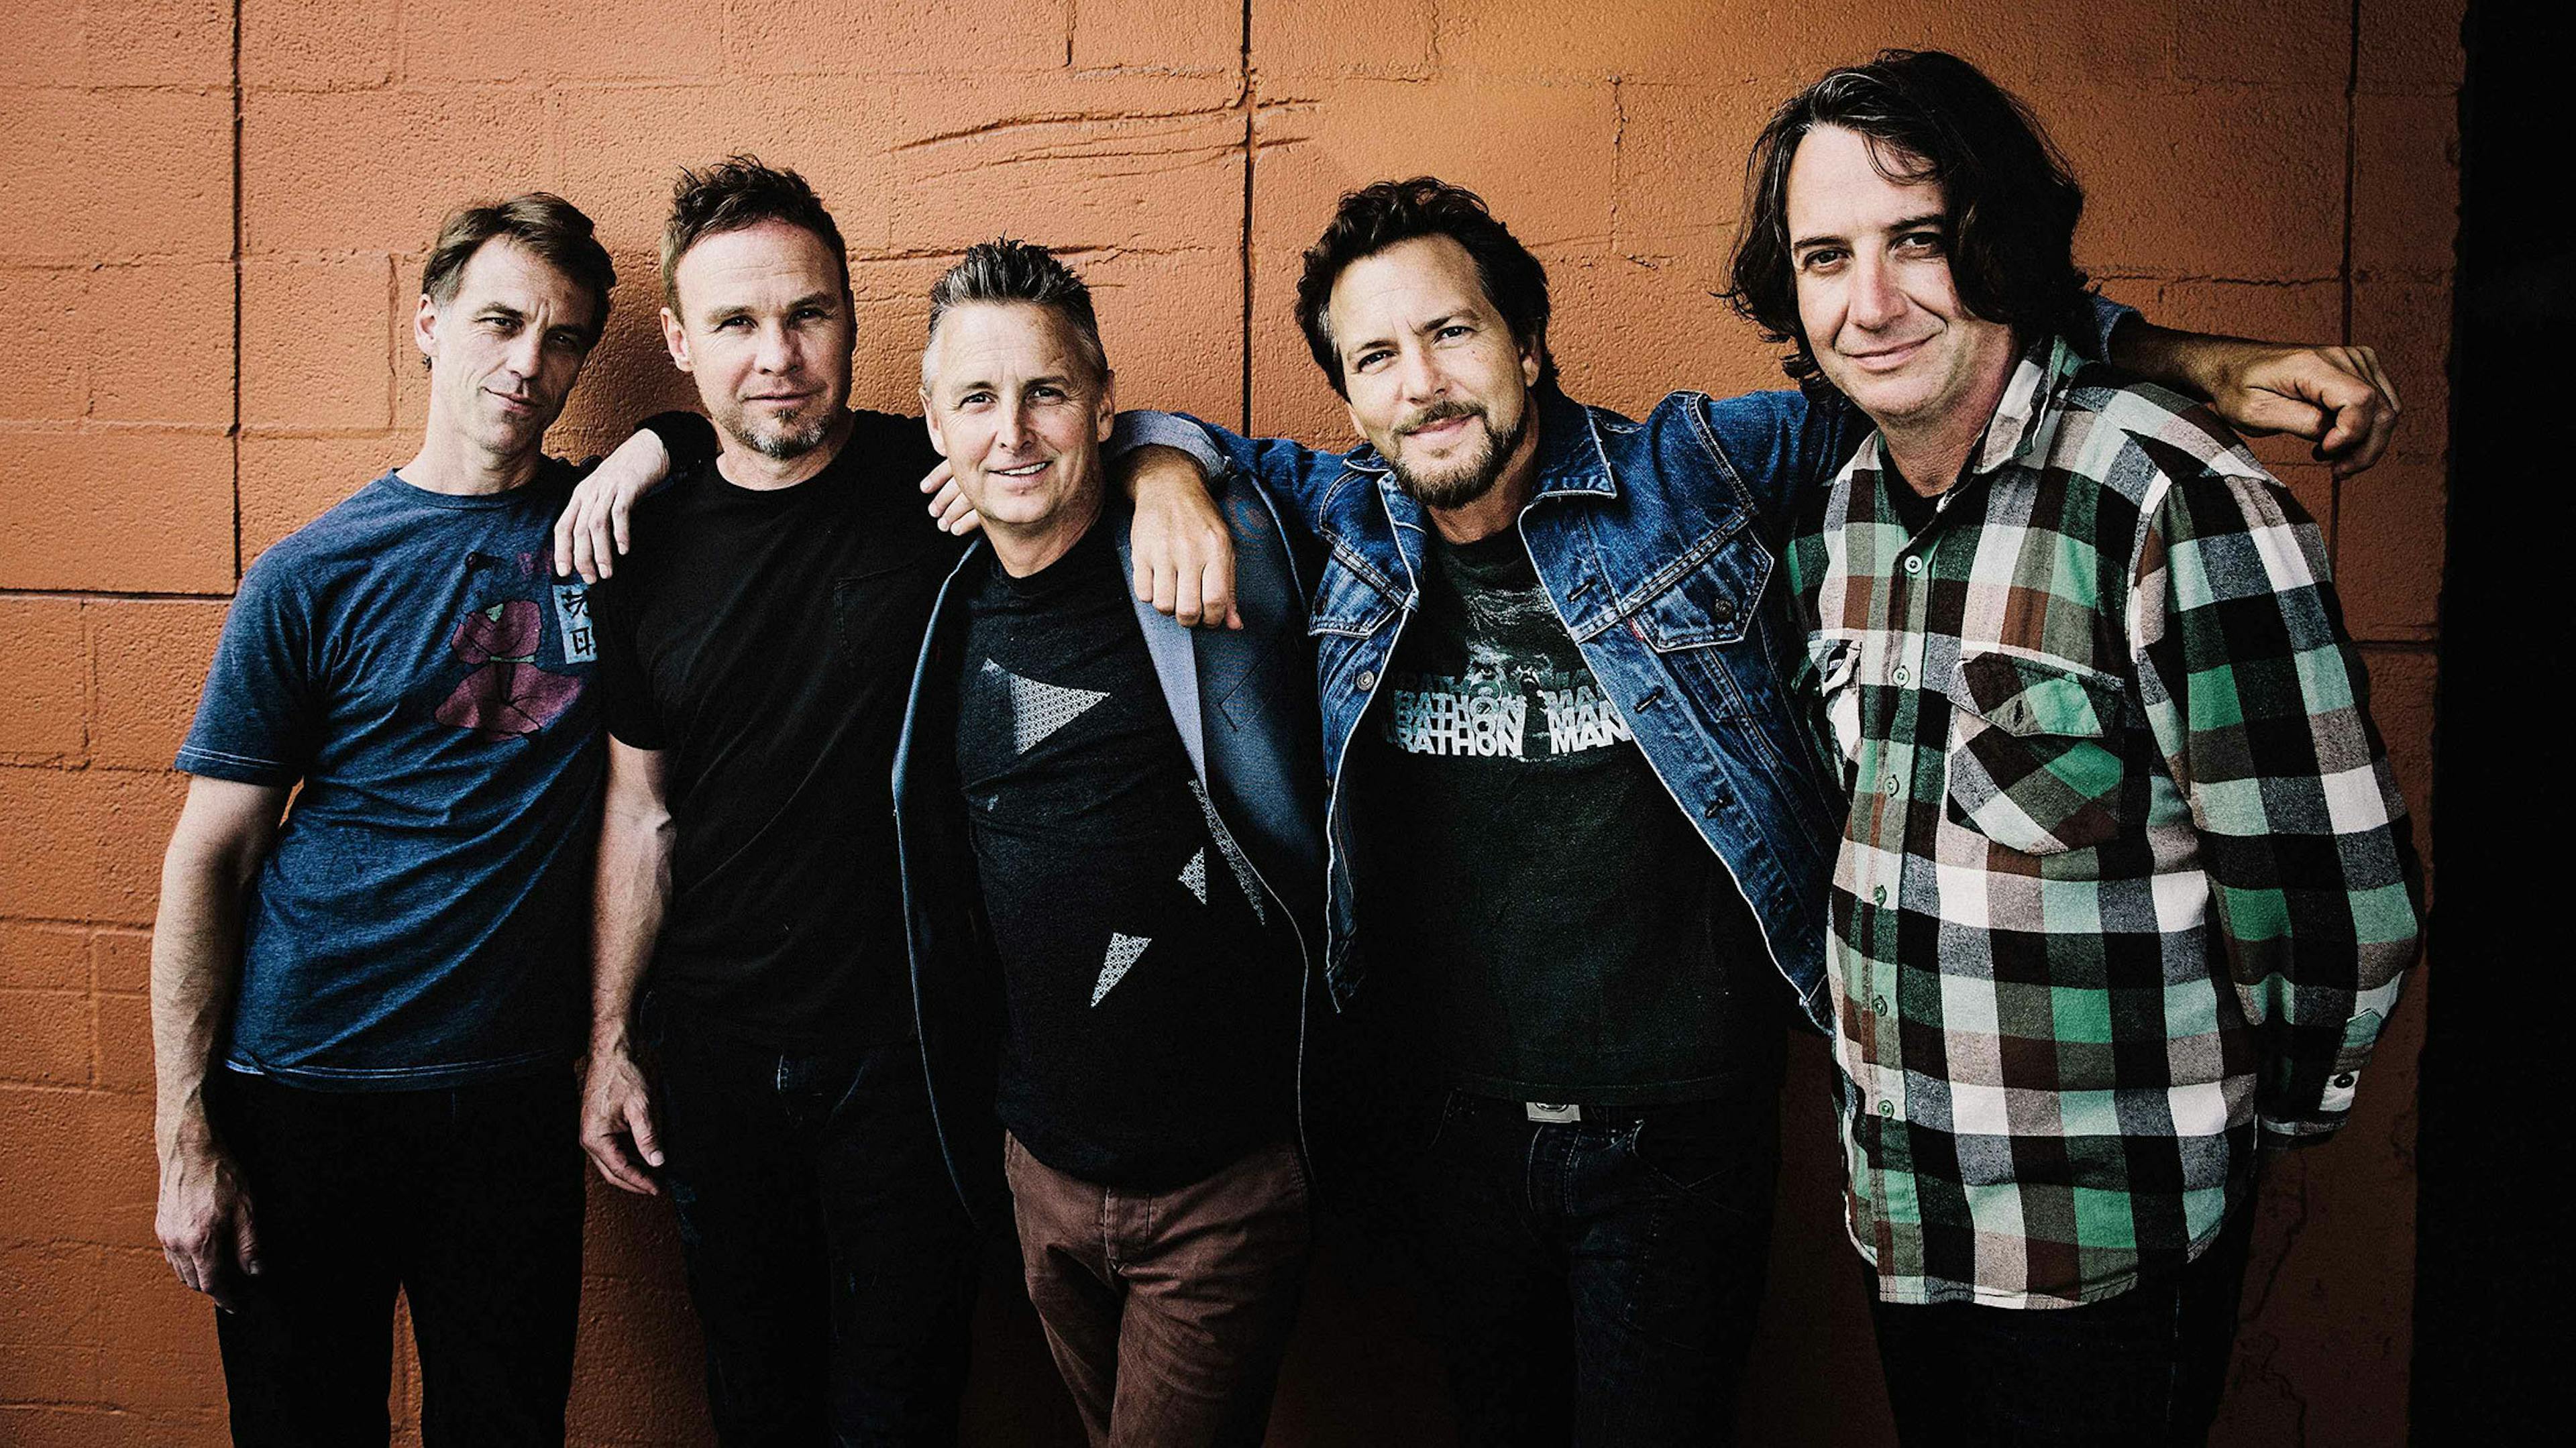 Stone Gossard: I Want Pearl Jam’s Next Album To Make People Go, ‘Wow, That’s Unexpected!’